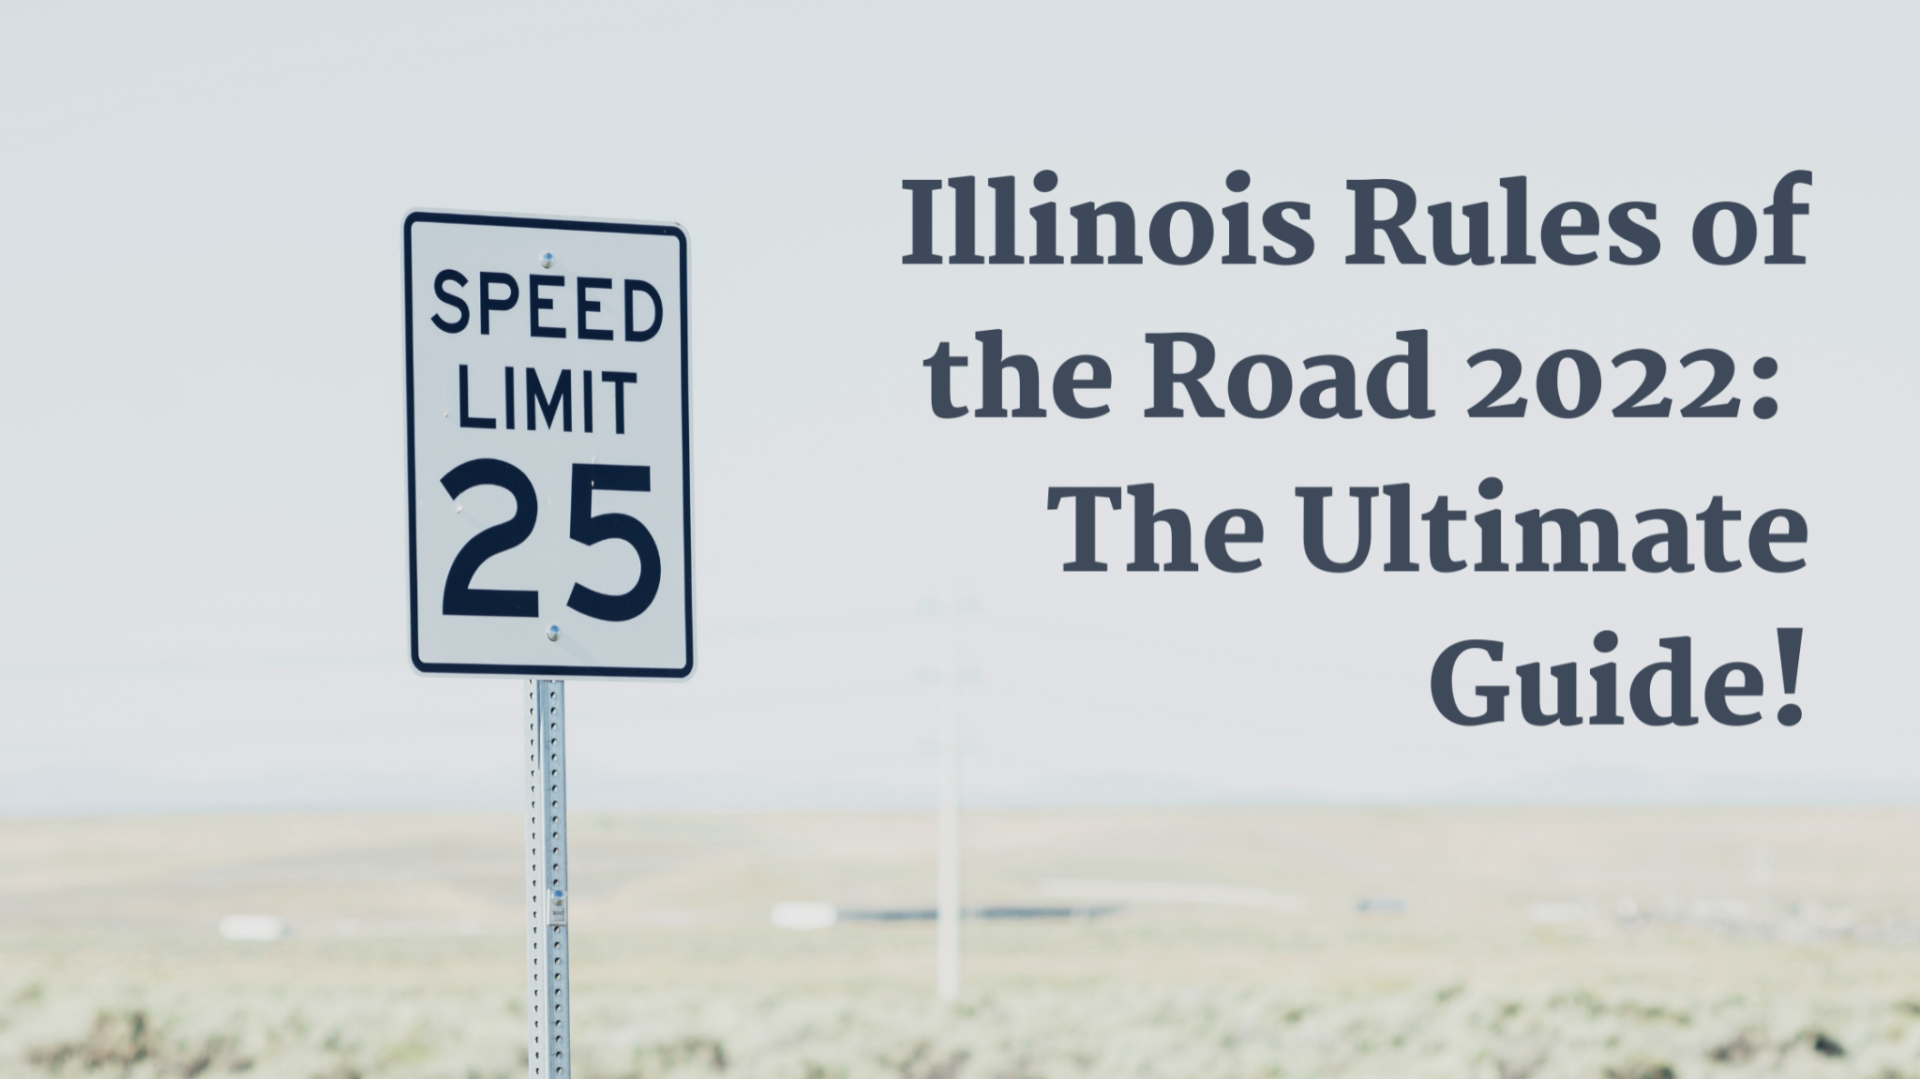 Illinois Rules of the Road 2022